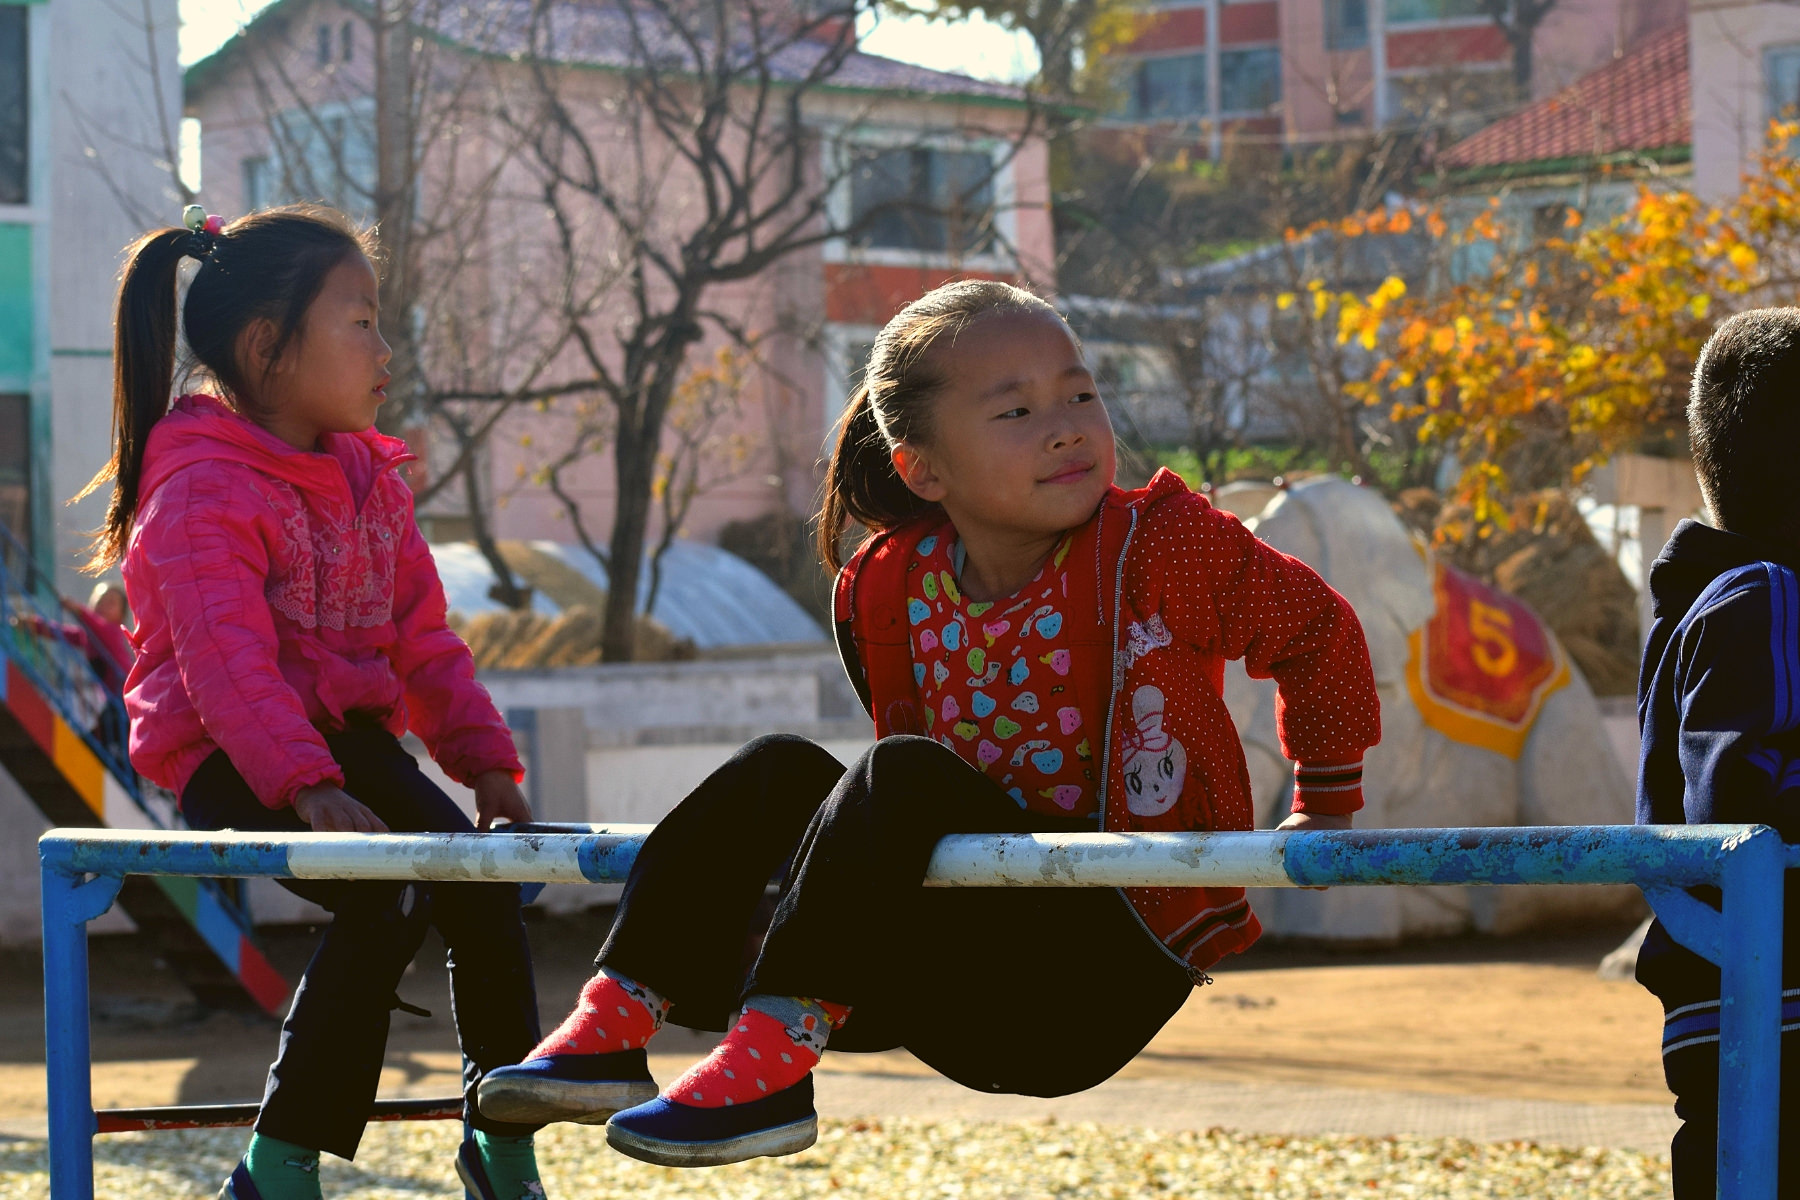 Kindergarten in a cooperative farm in North Korea. Visit arranged by KTG. We arrange trips for people who would like to donate goods to farms and orphanages in North Korea (DPRK)